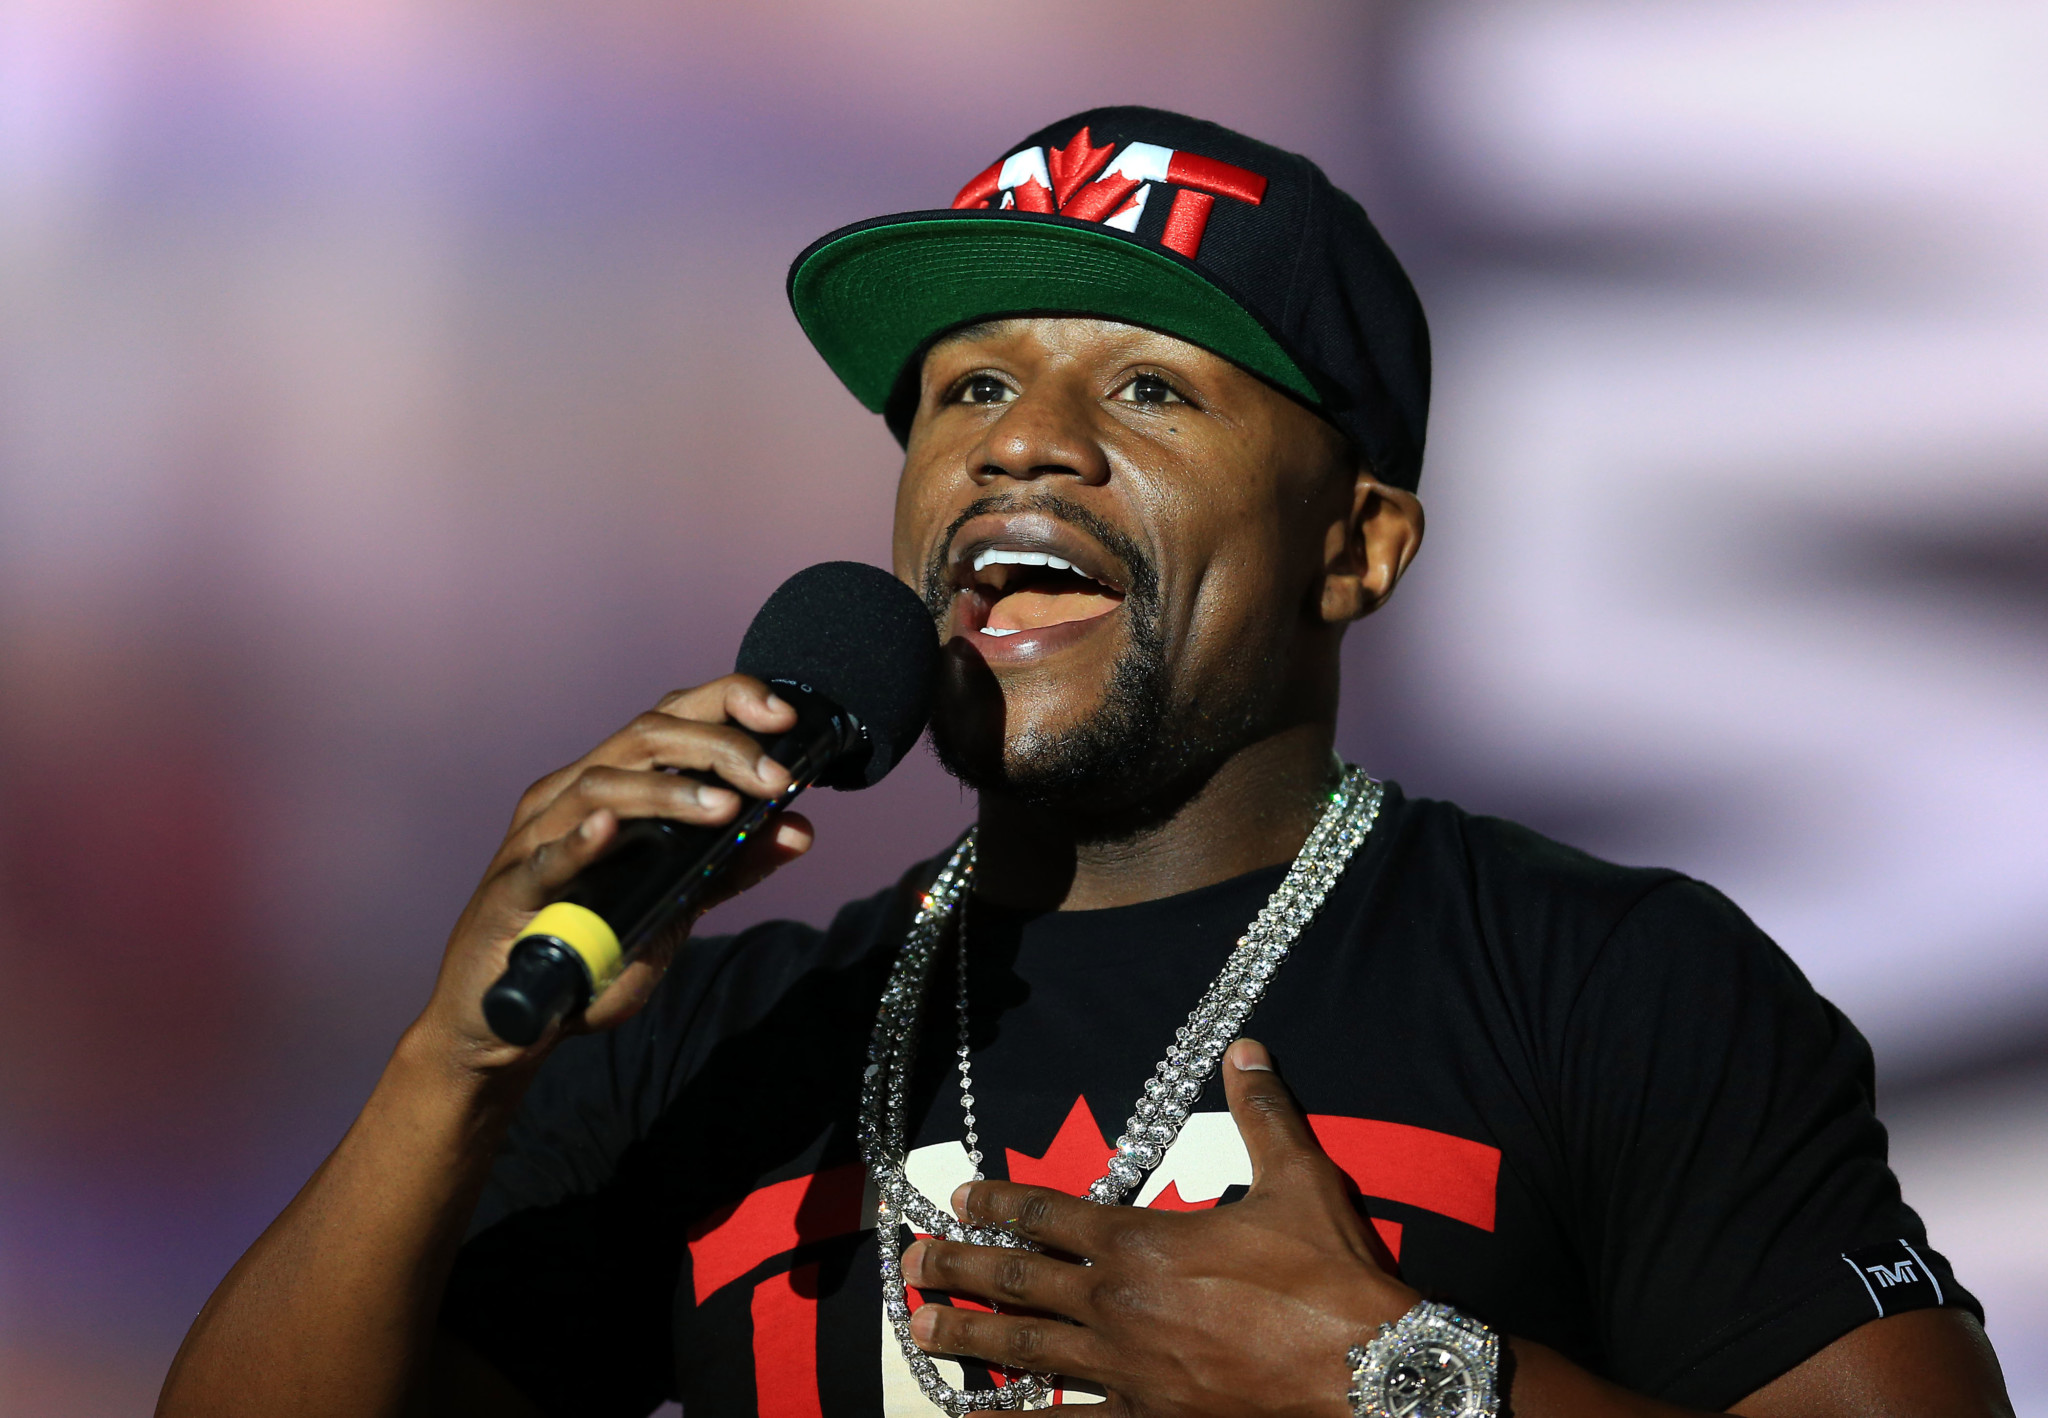 Floyd mayweather jr. During the press conference